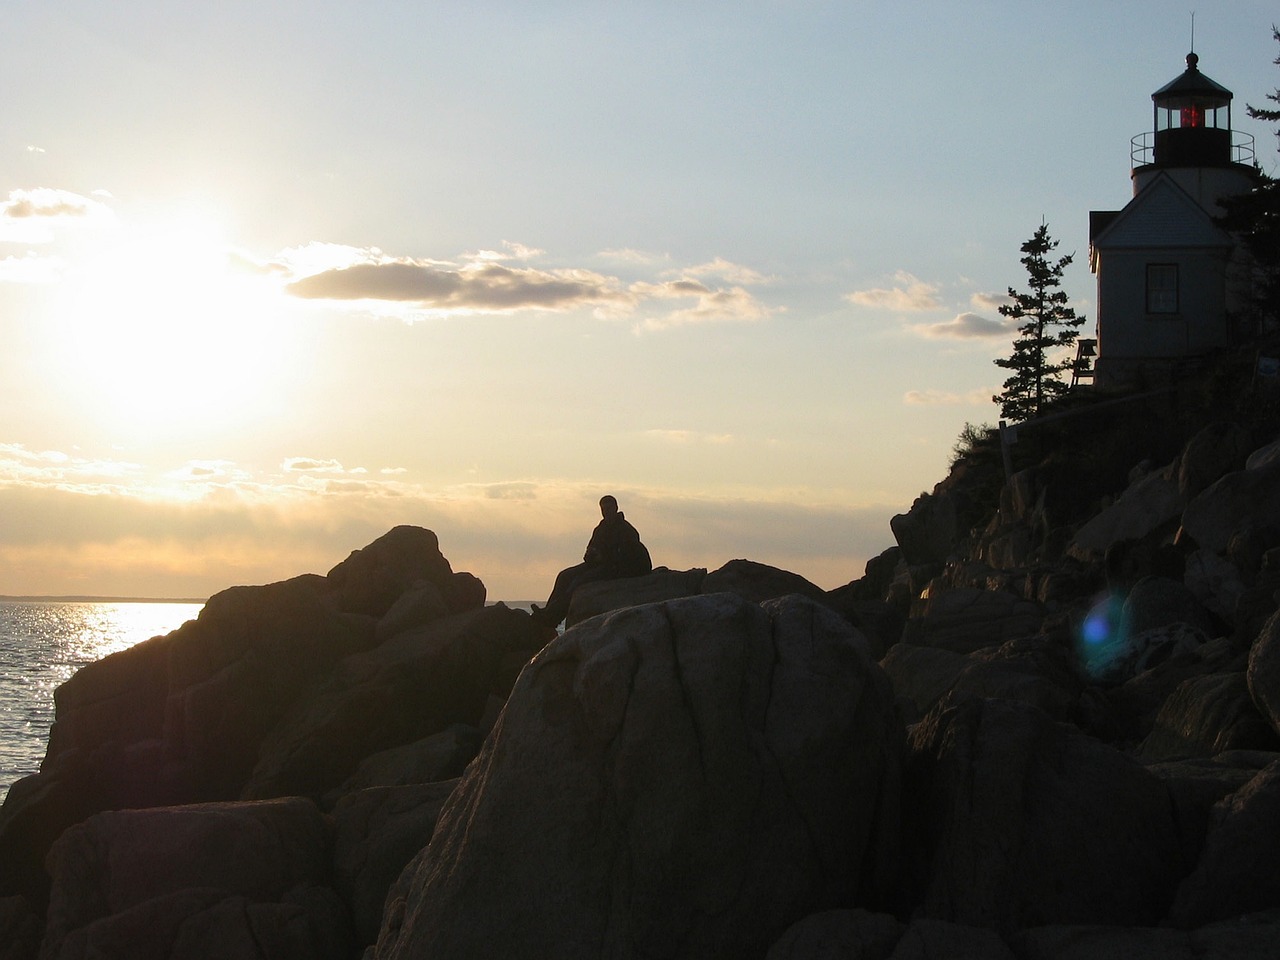 Acadia National Park Adventure in 3 Days